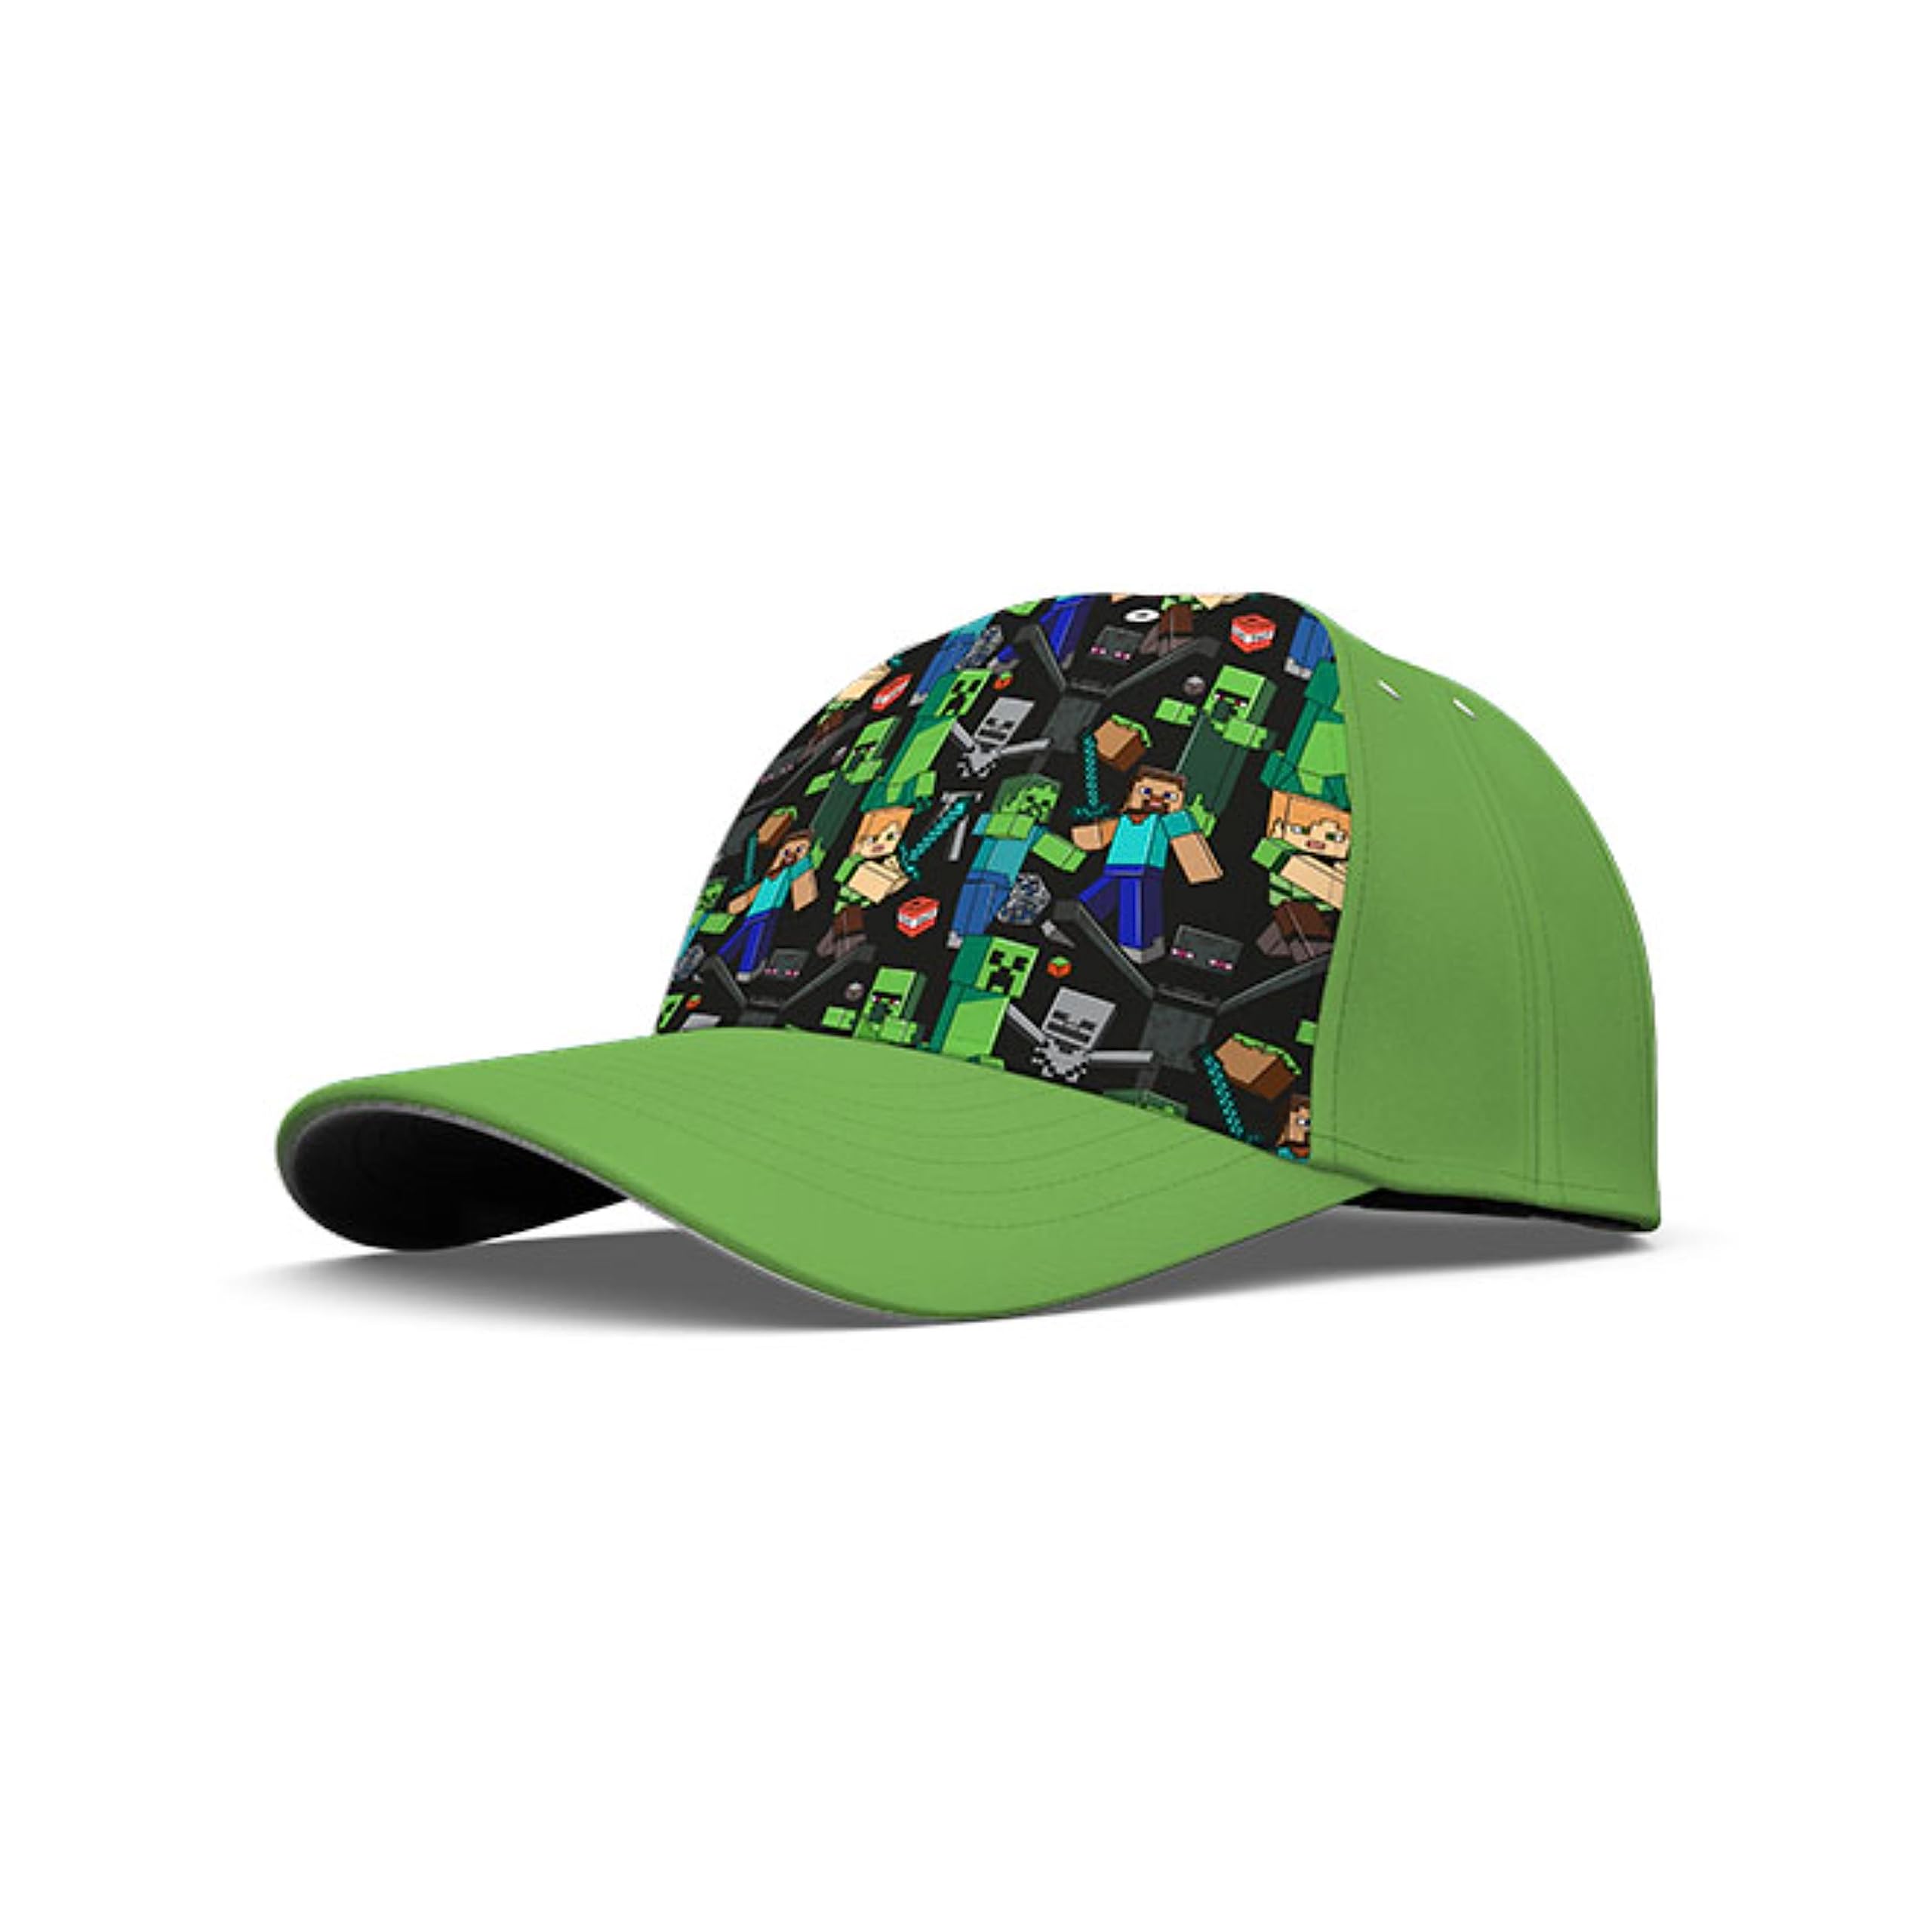 Minecraft Light Green Baseball Cap for Kids, Summer Sun Protection Polyester Hat, Breathable Cap for Kids Gift Sports